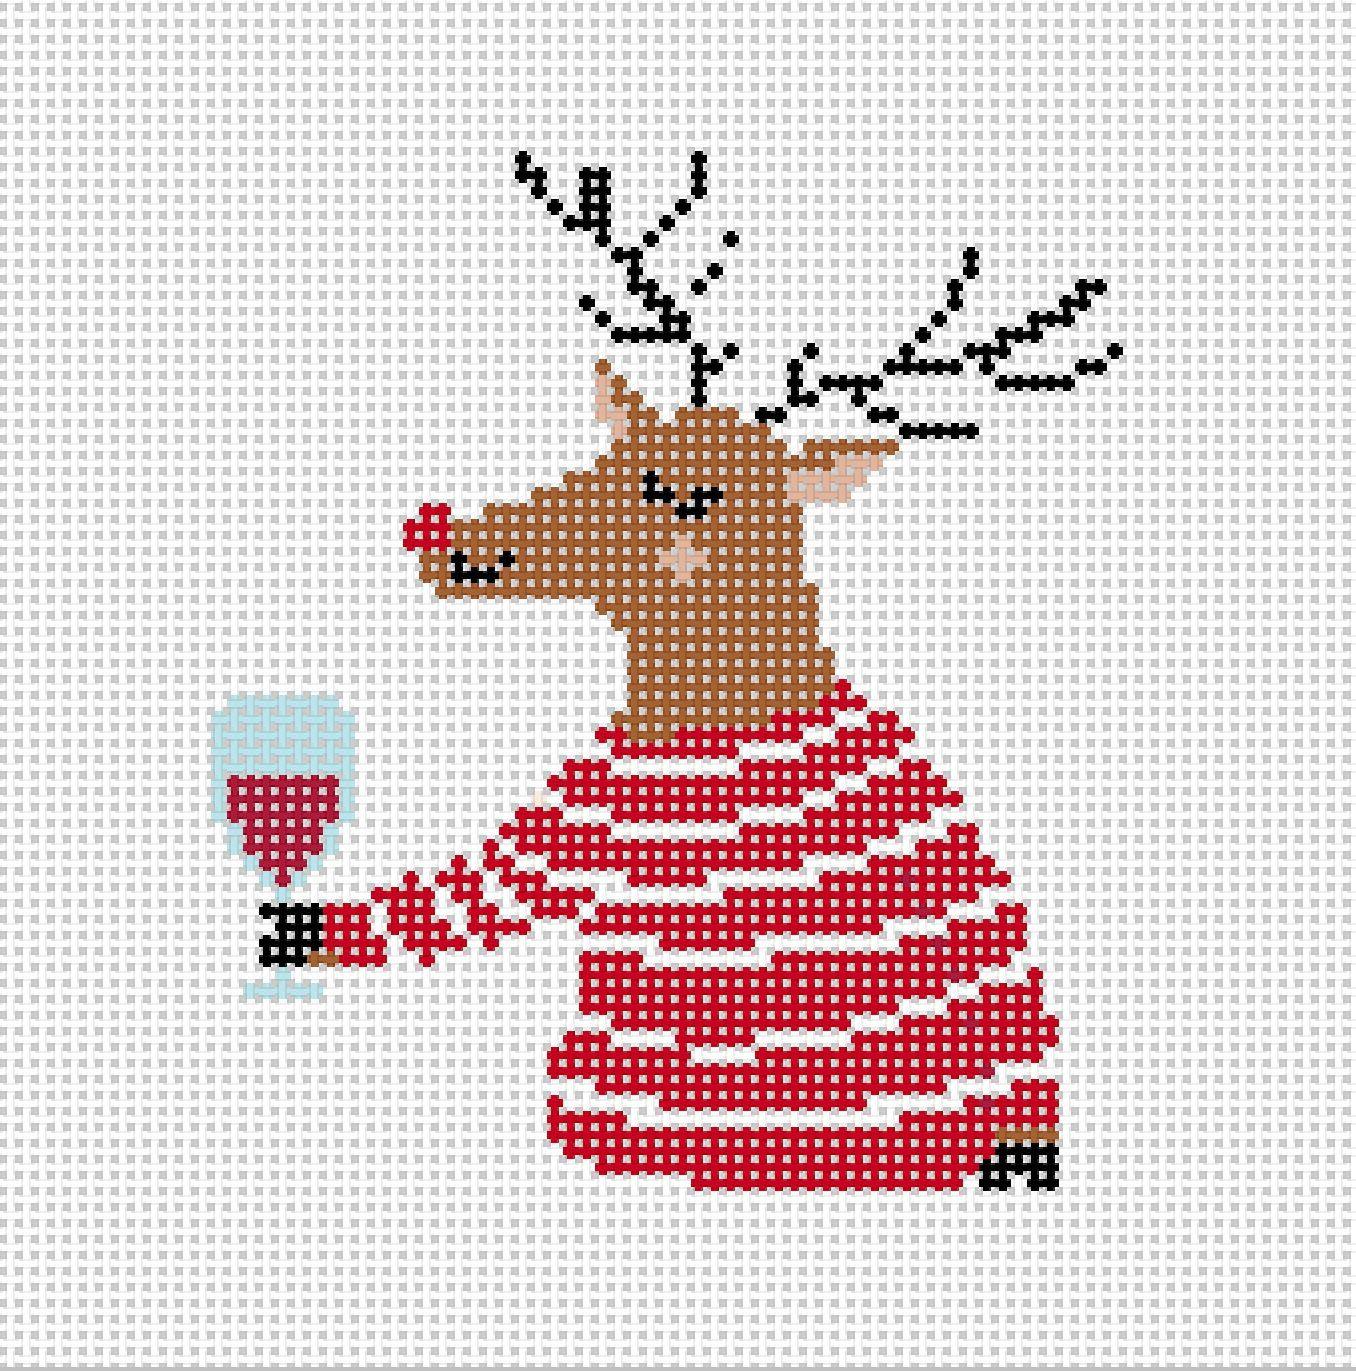 Reindeer drinking wine - Needlepoint by Laura